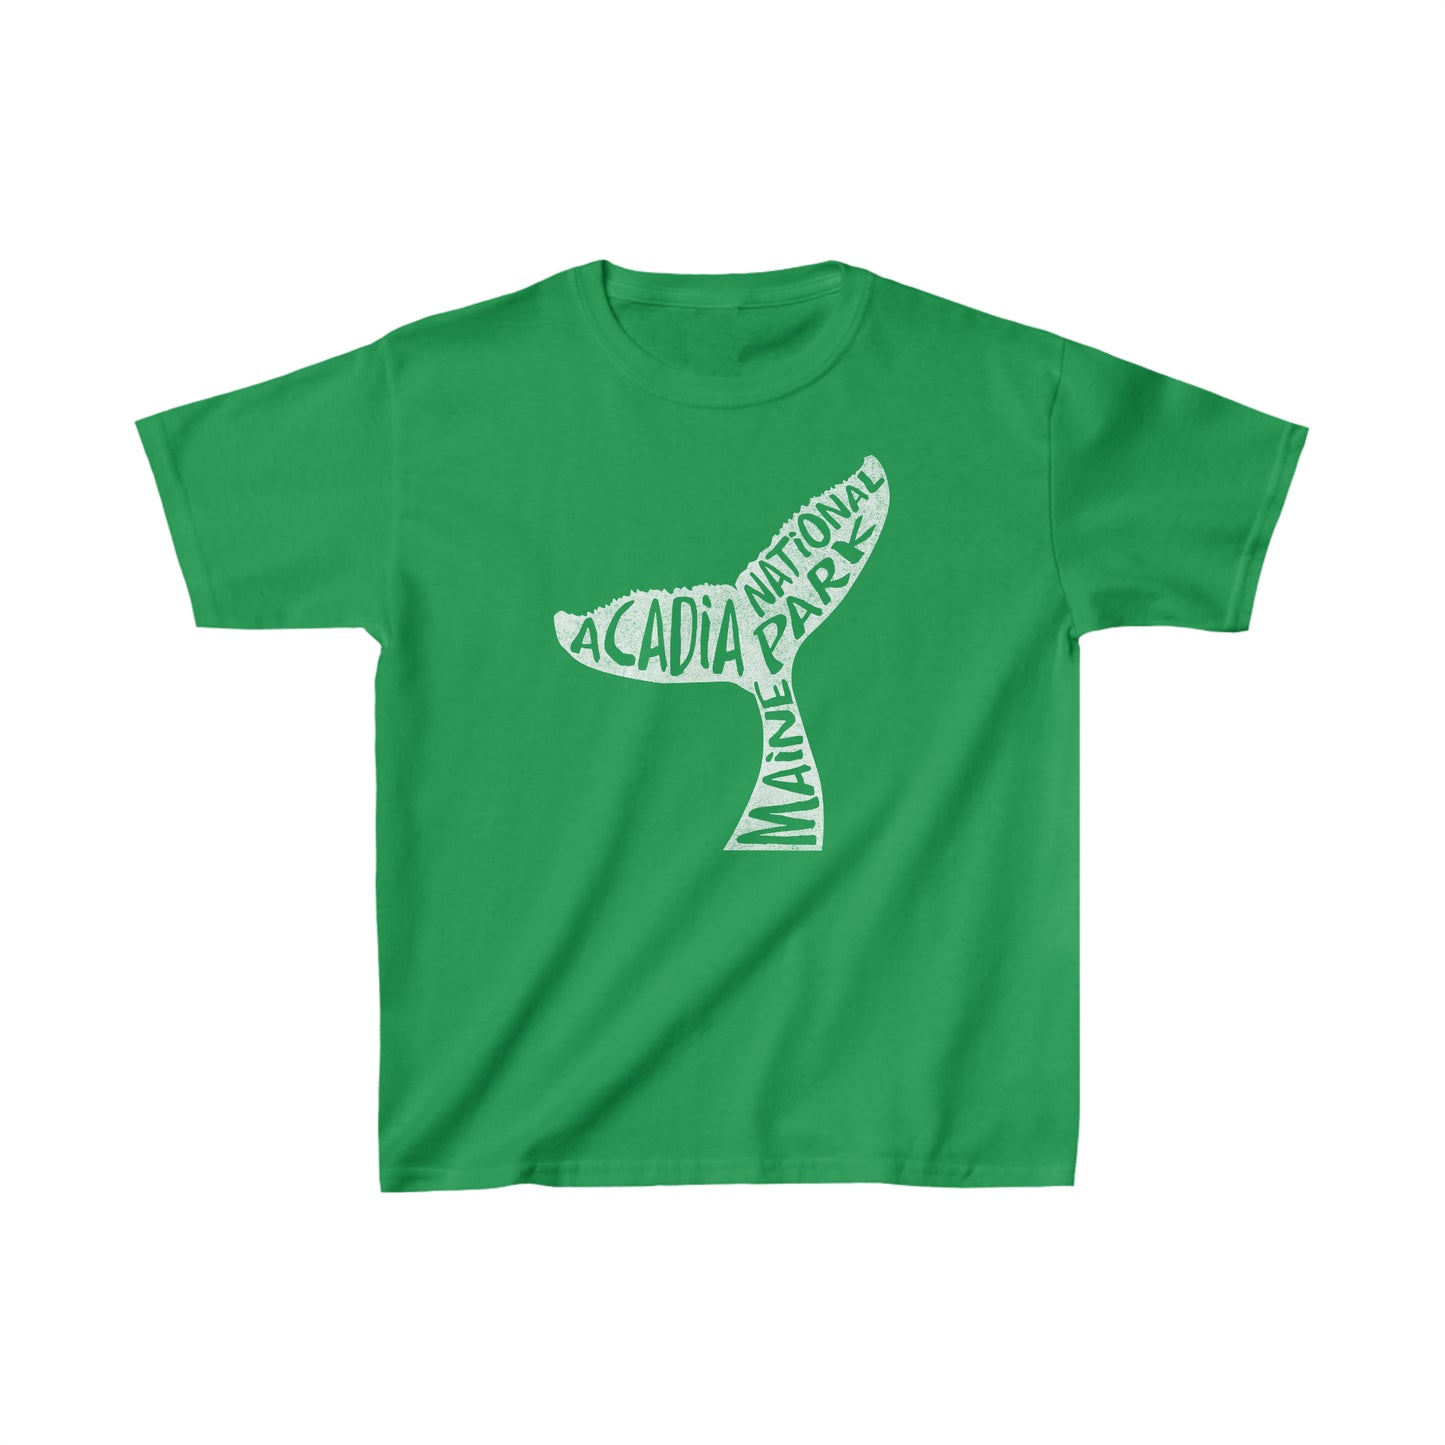 Acadia National Park Child T-Shirt - Whale Tail Design